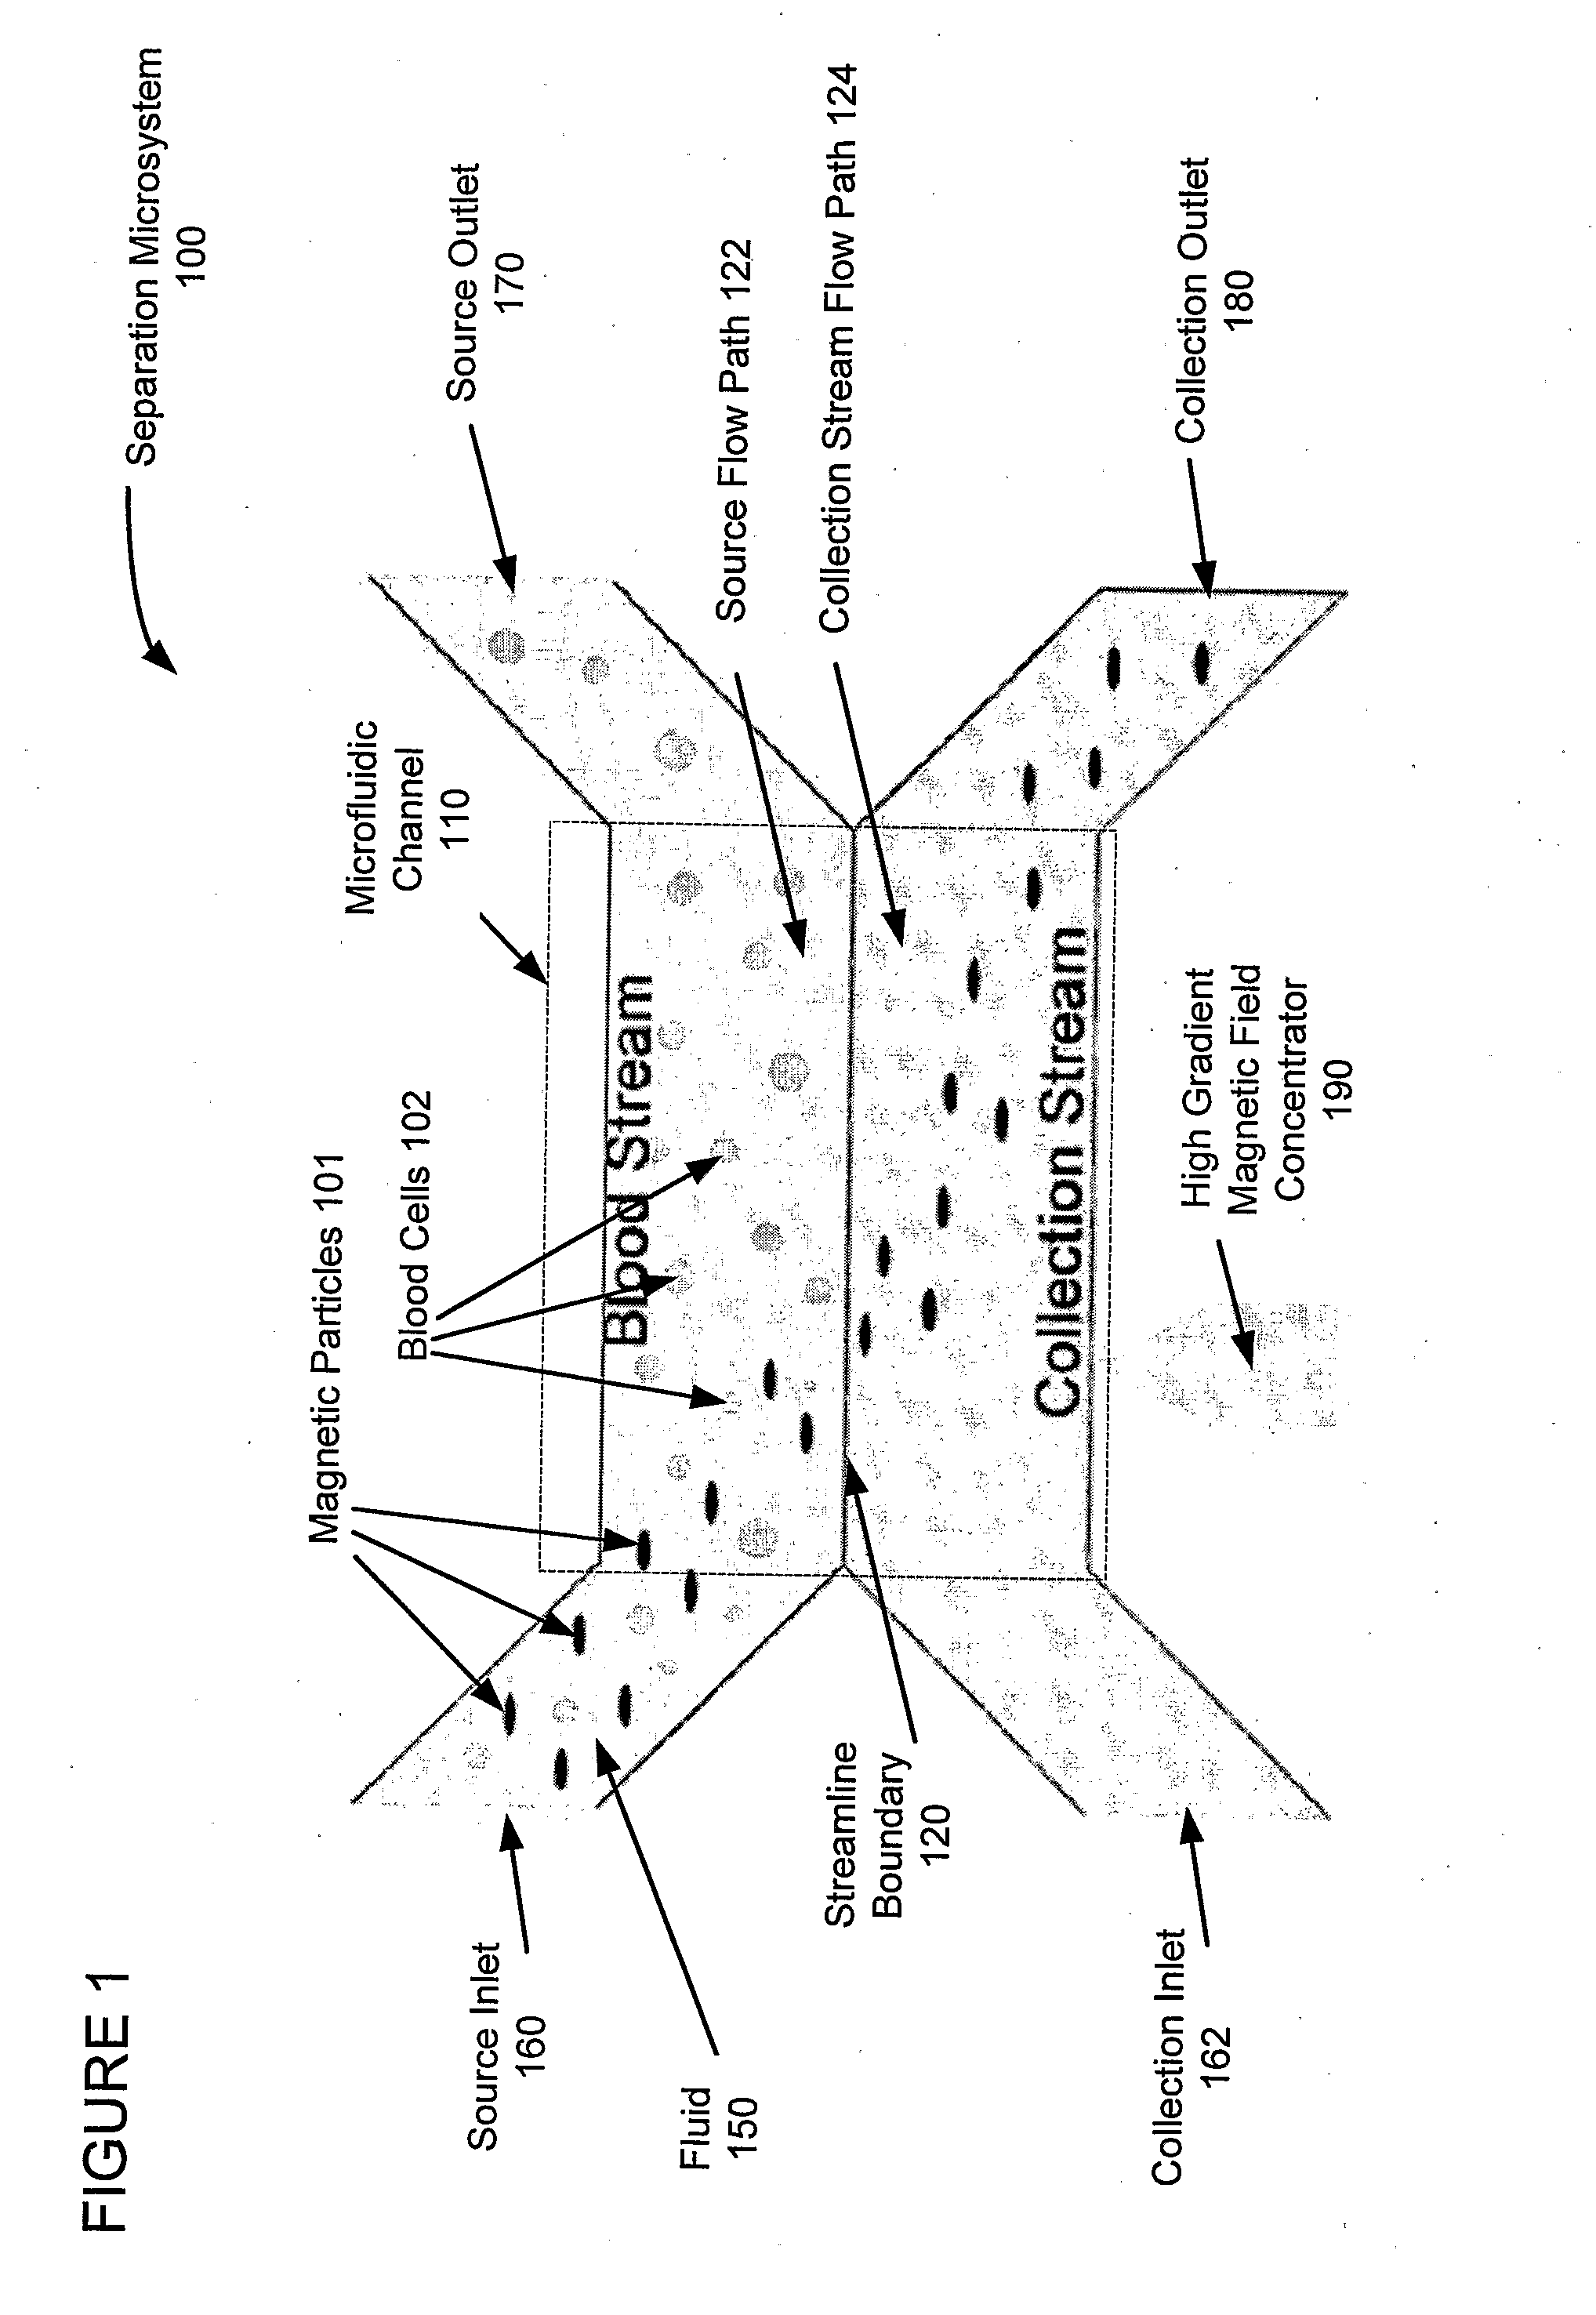 Device and method for combined microfluidic-micromagnetic separation of material in continuous flow